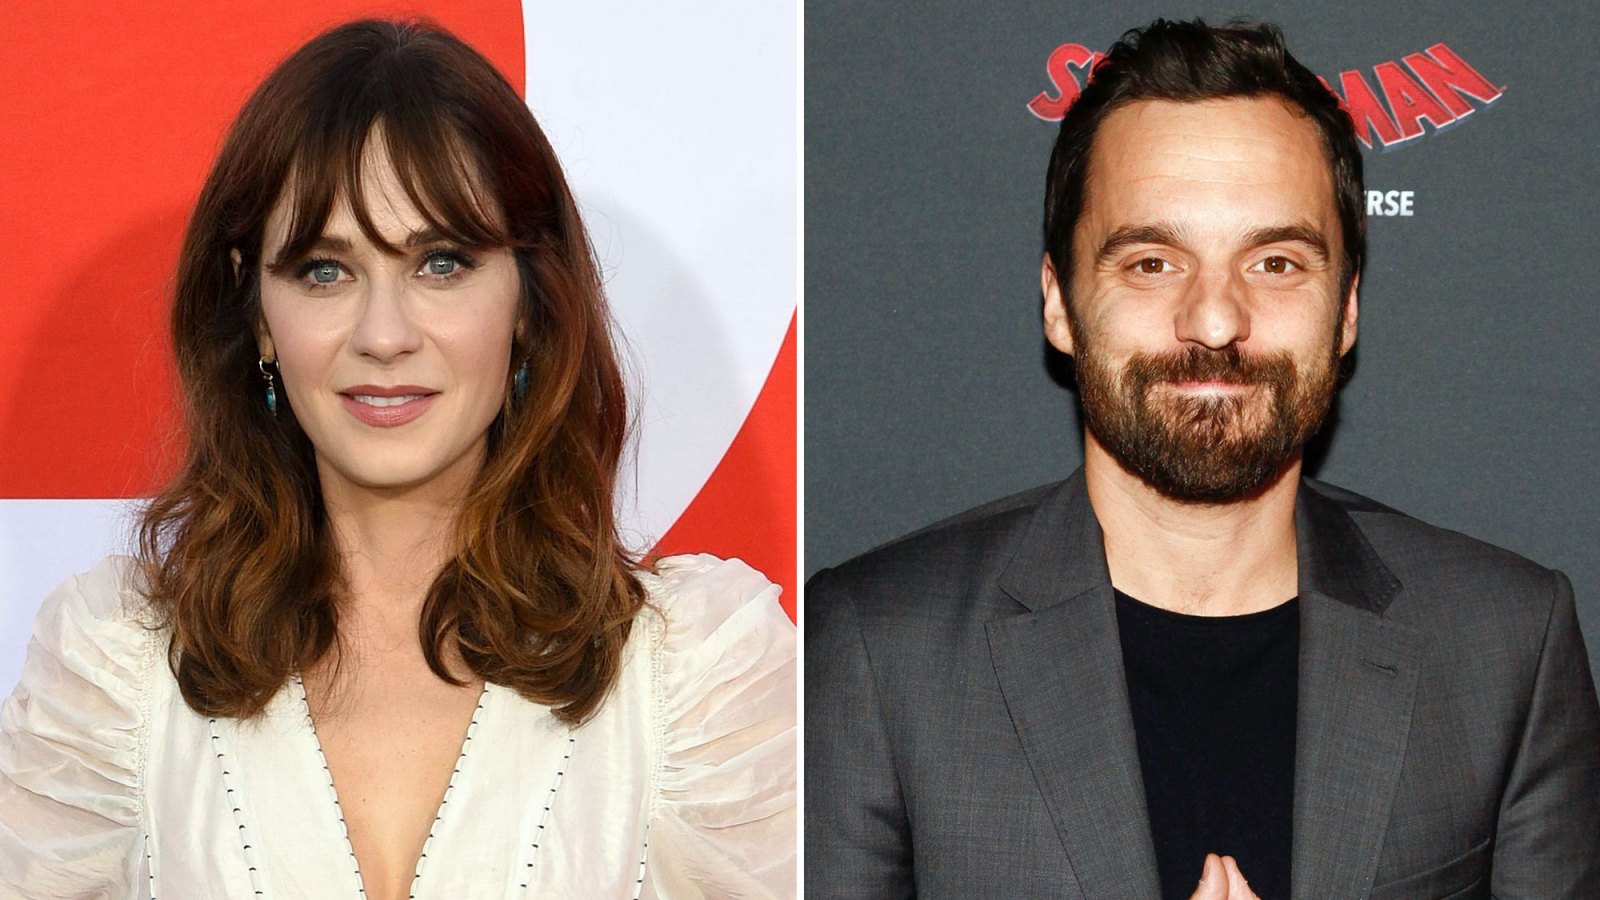 New Girl Writers Thought Zooey Deschanel and Jake Johnson Had Too Much Chemistry Isn't That a Good Thing